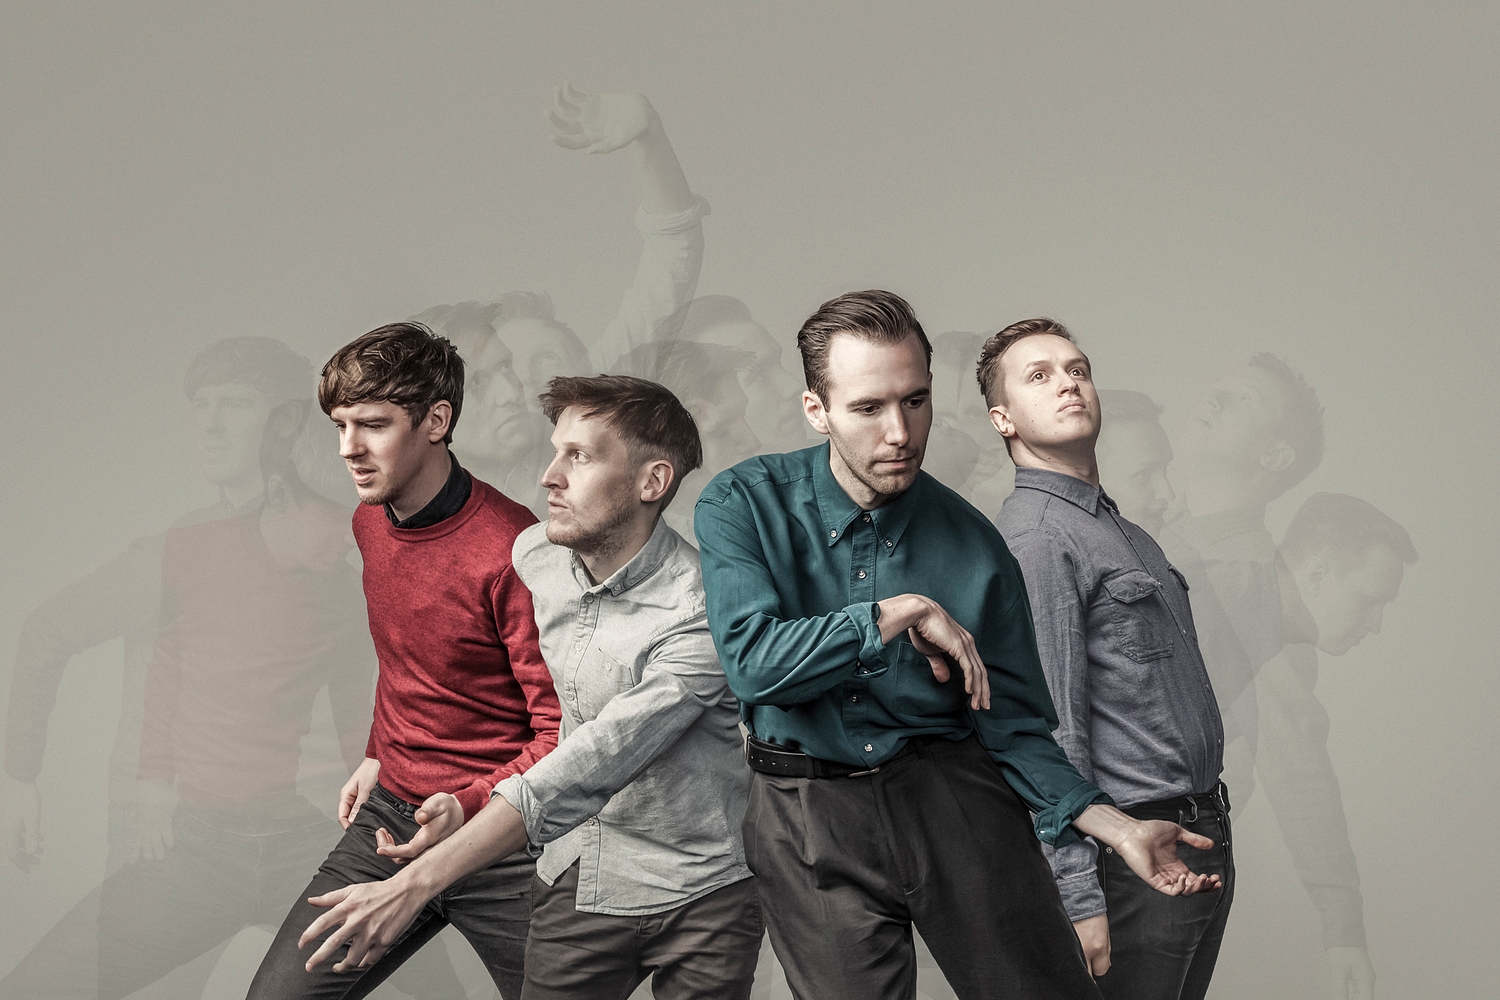 Dutch Uncles: “It’ll be a great opportunity for a bit of a do-over!”